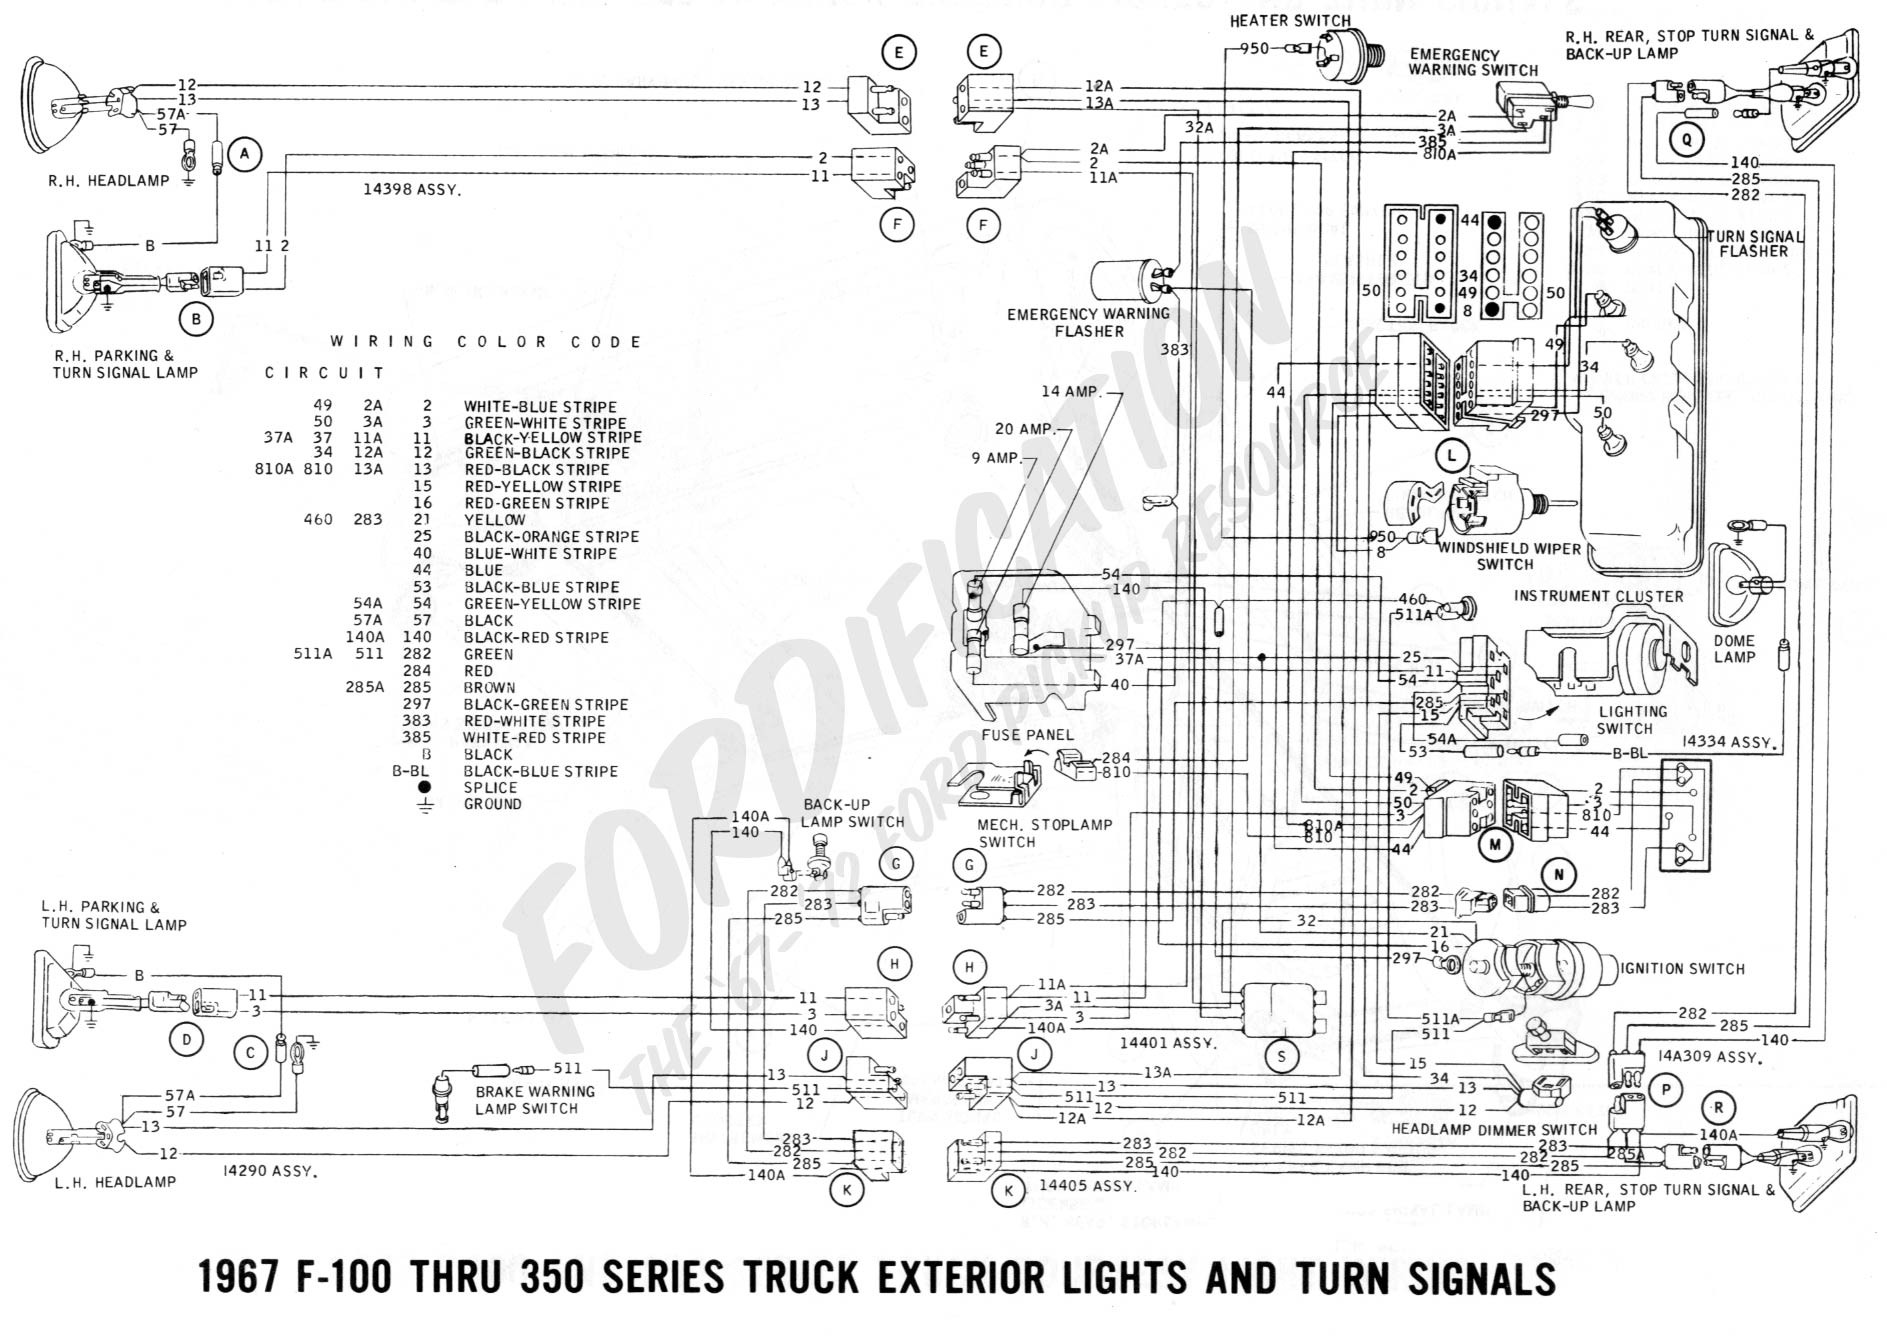 1986 ford F350 Wiring Diagram ford Truck Technical Drawings and Schematics Section H Wiring Of 1986 ford F350 Wiring Diagram